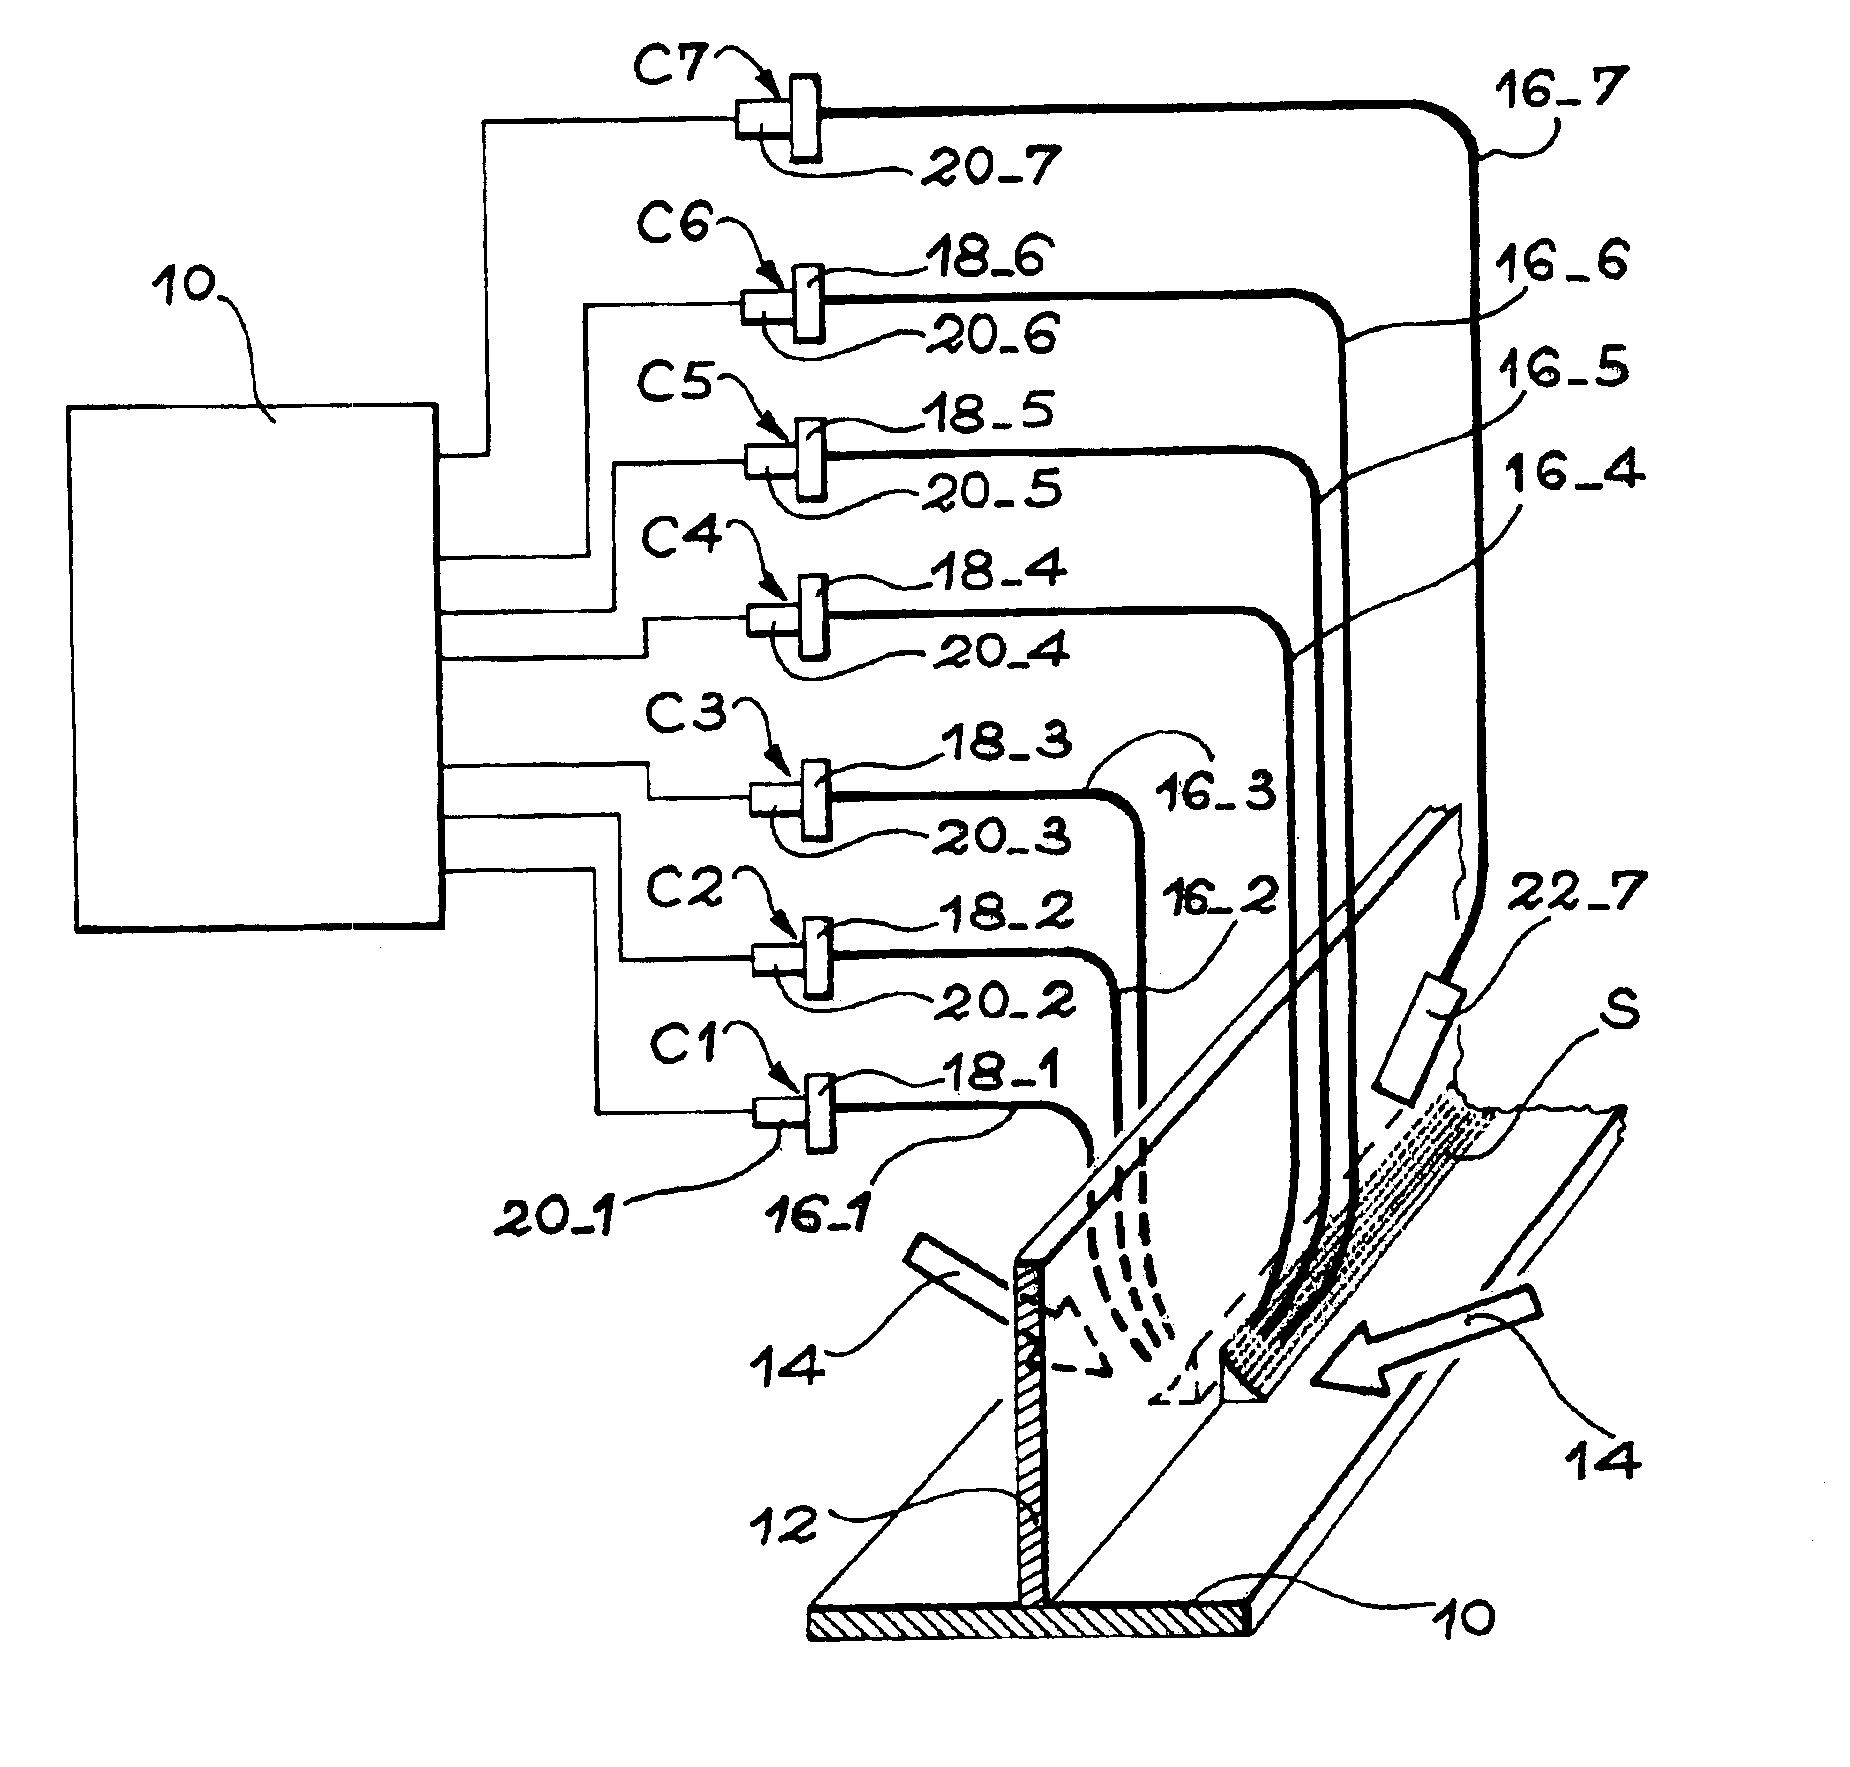 Method for detecting and identifying defects in a laser beam weld seam